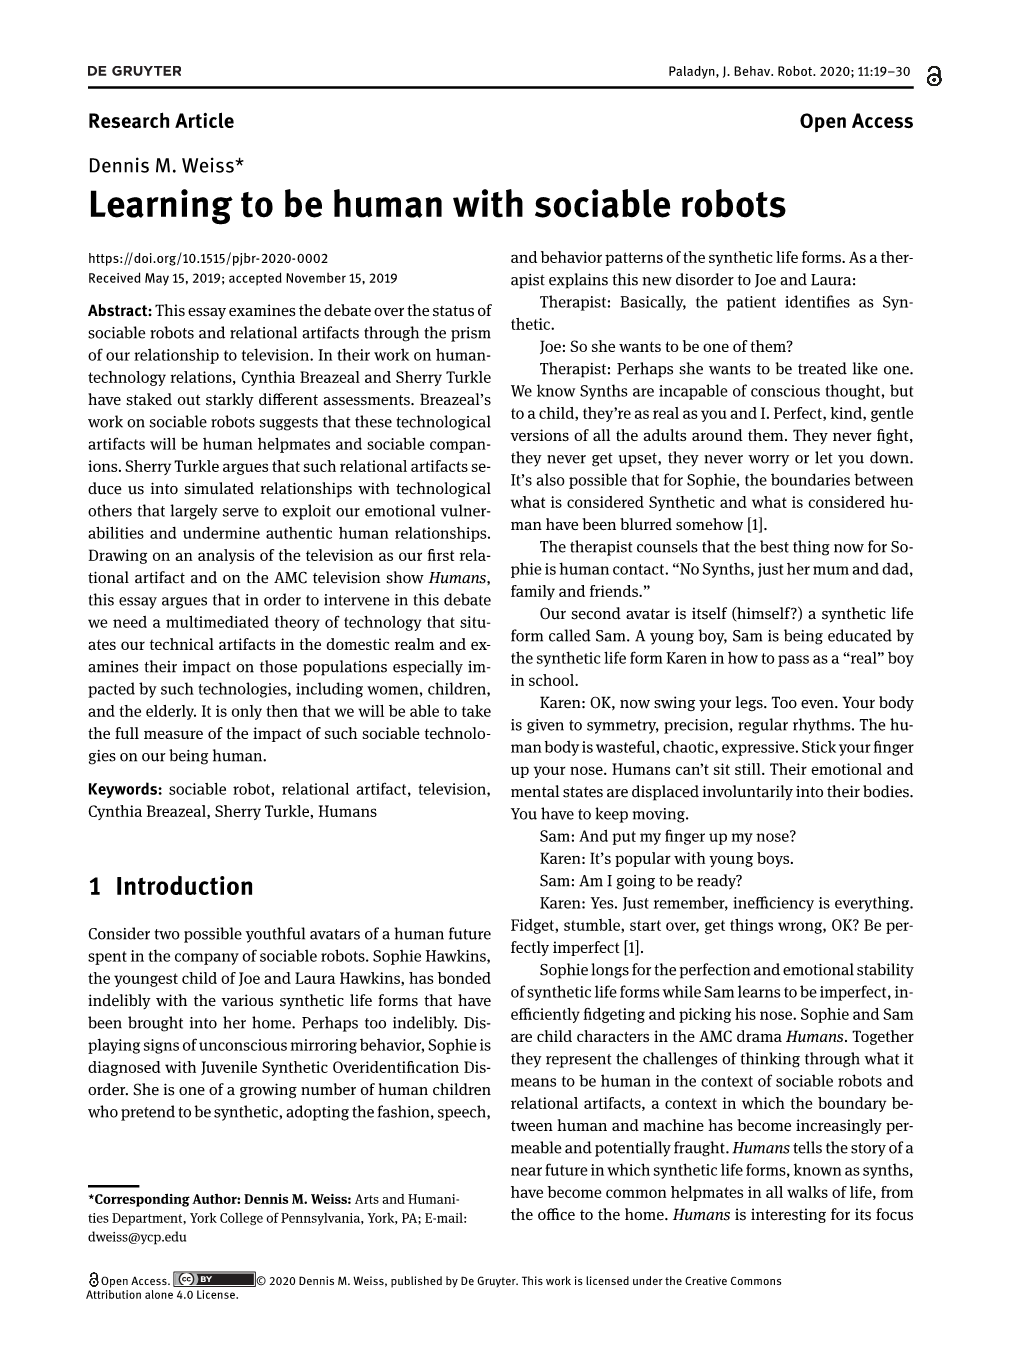 Learning to Be Human with Sociable Robots and Behavior Patterns of the Synthetic Life Forms